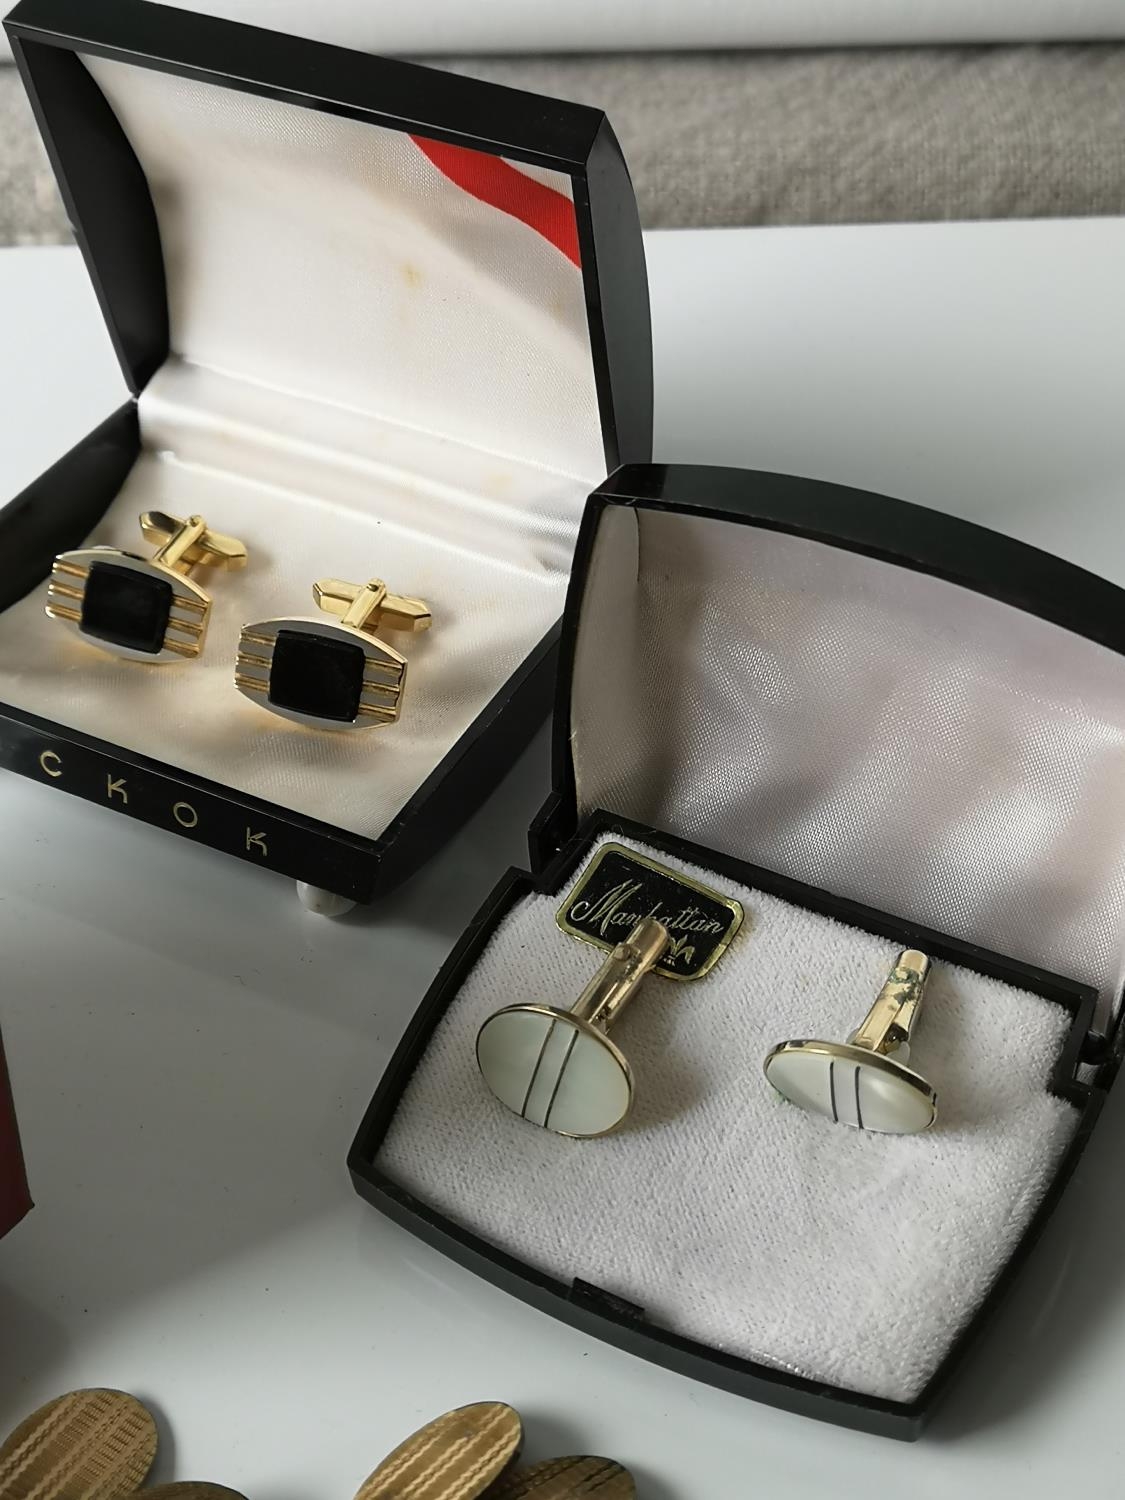 A Pair of vintage 9ct gold cufflinks with original box produced by H. Samuel. [7.48grams] a pair - Image 4 of 5